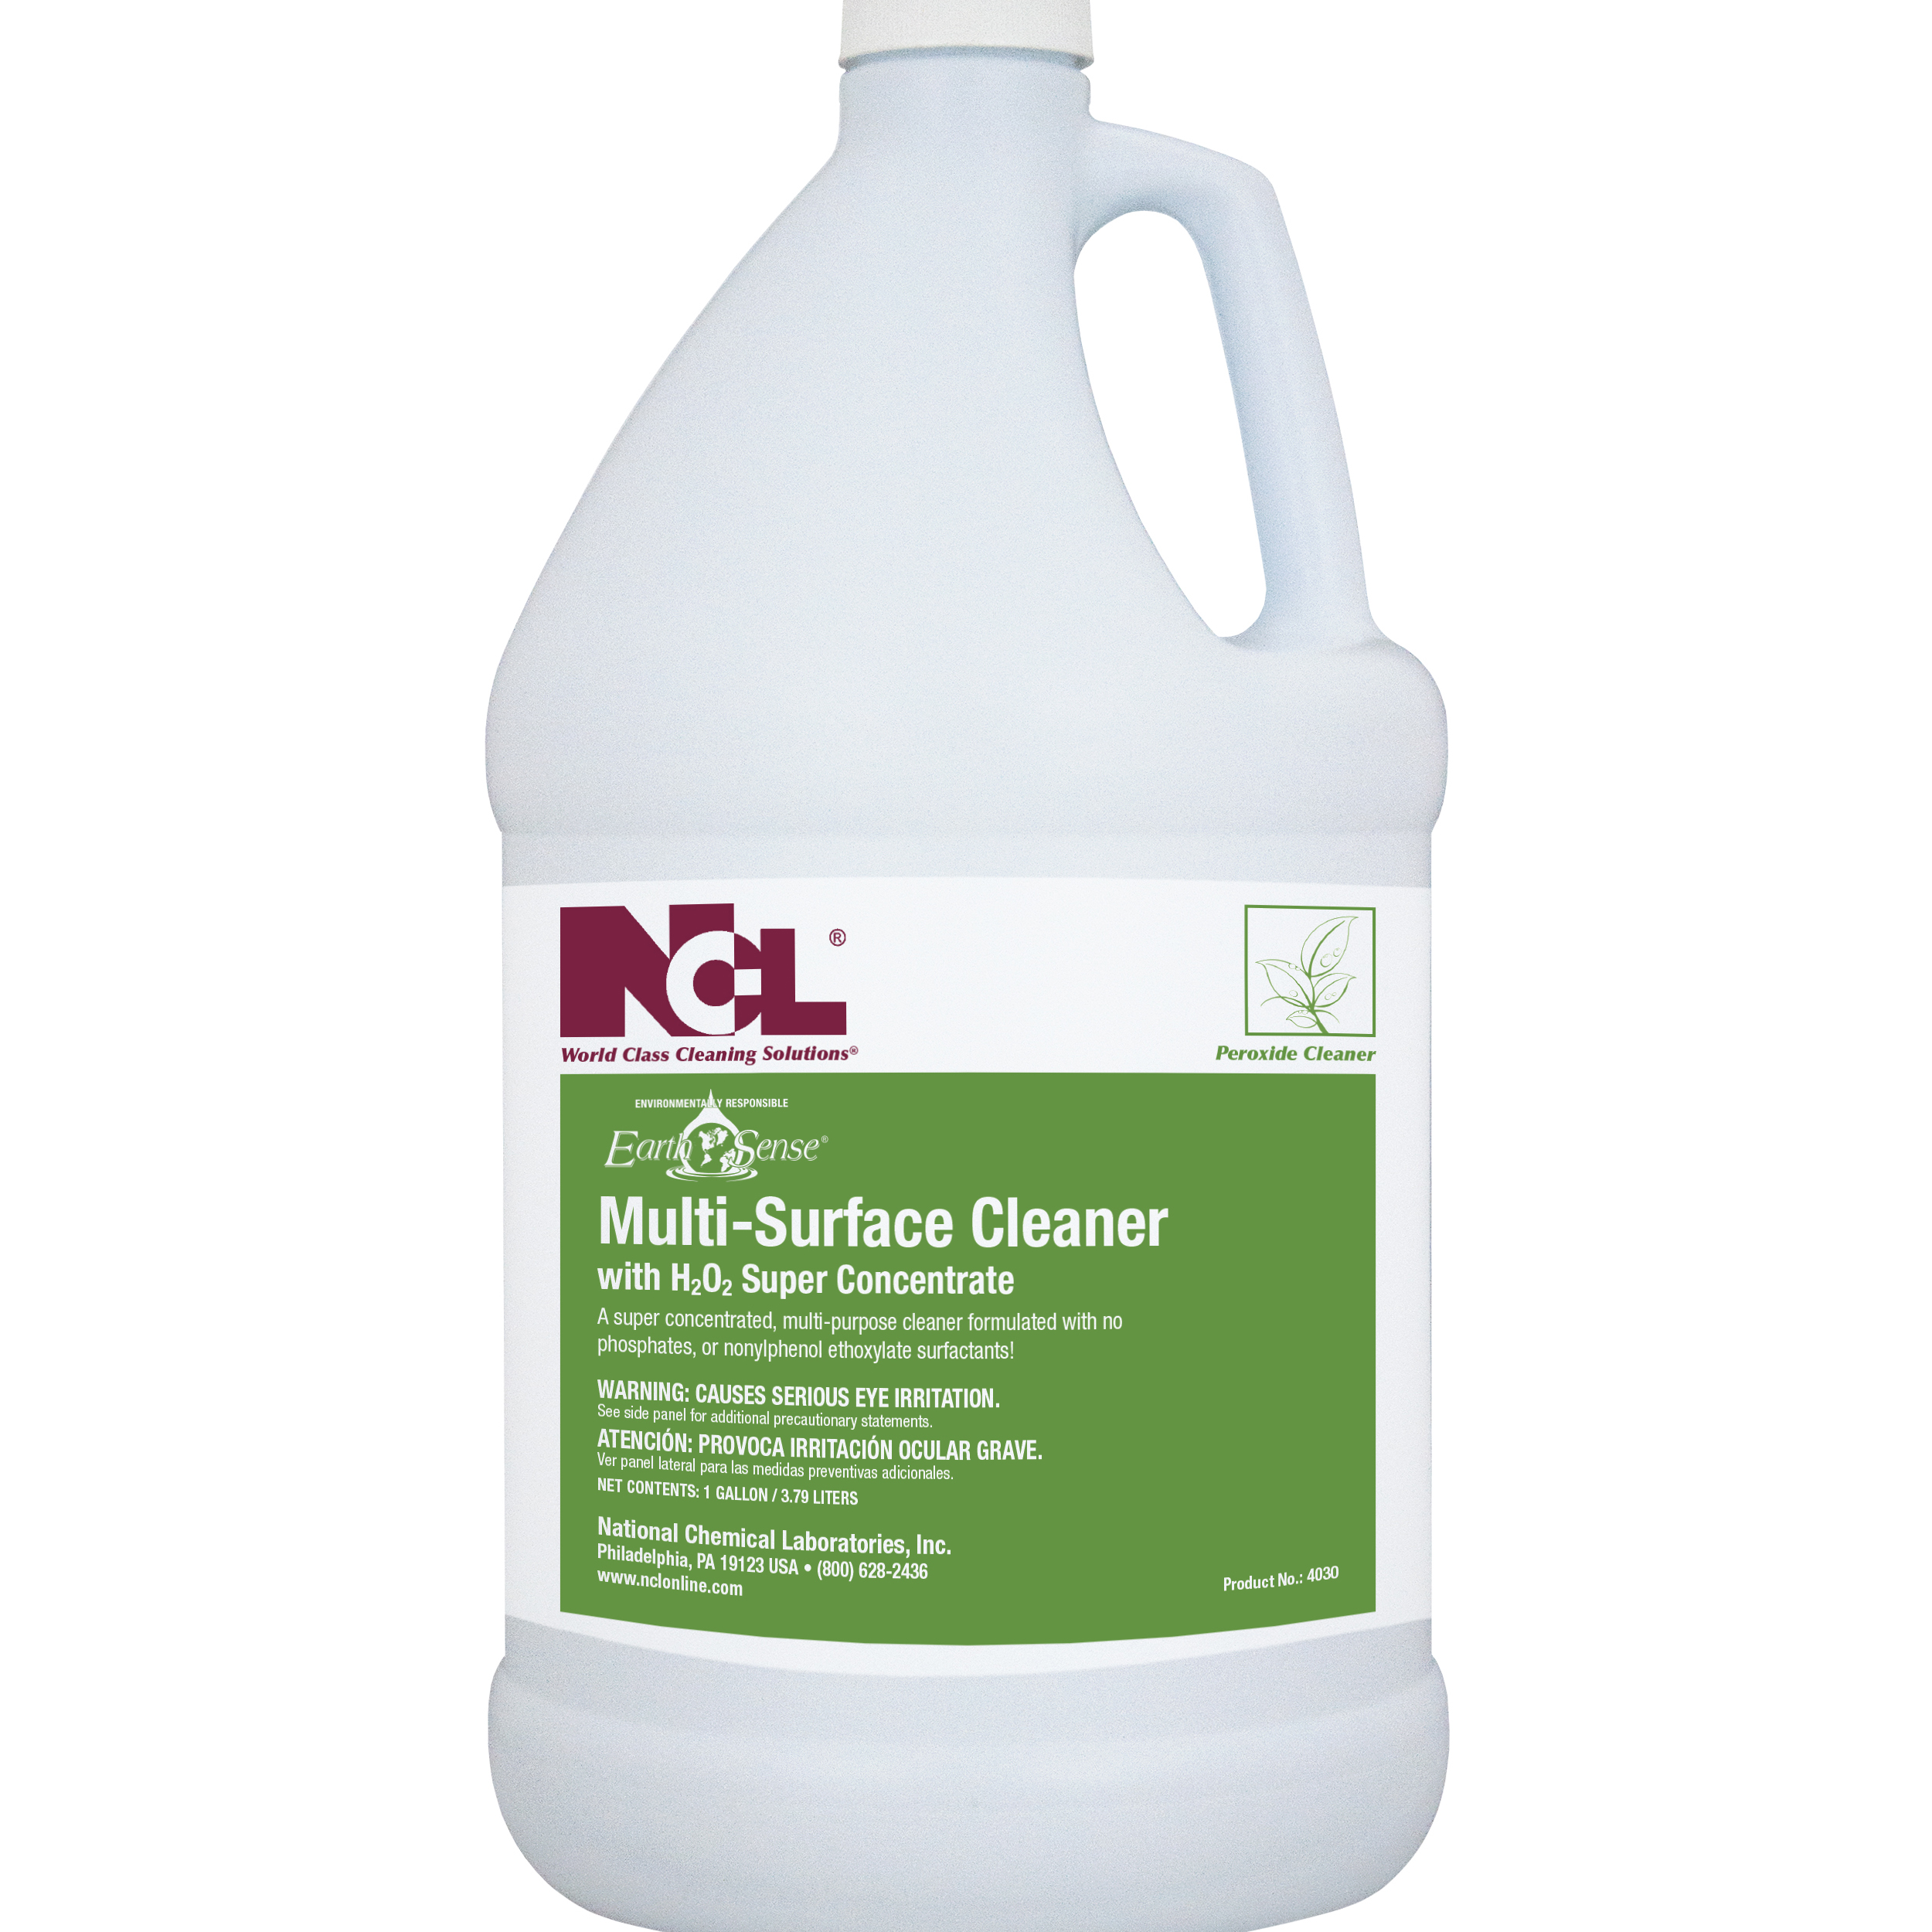  Earth Sense MULTI-SURFACE CLEANER WITH H2O2 SUPER CONCENTRATE 4/1 Gal. Case (NCL4030-29) 